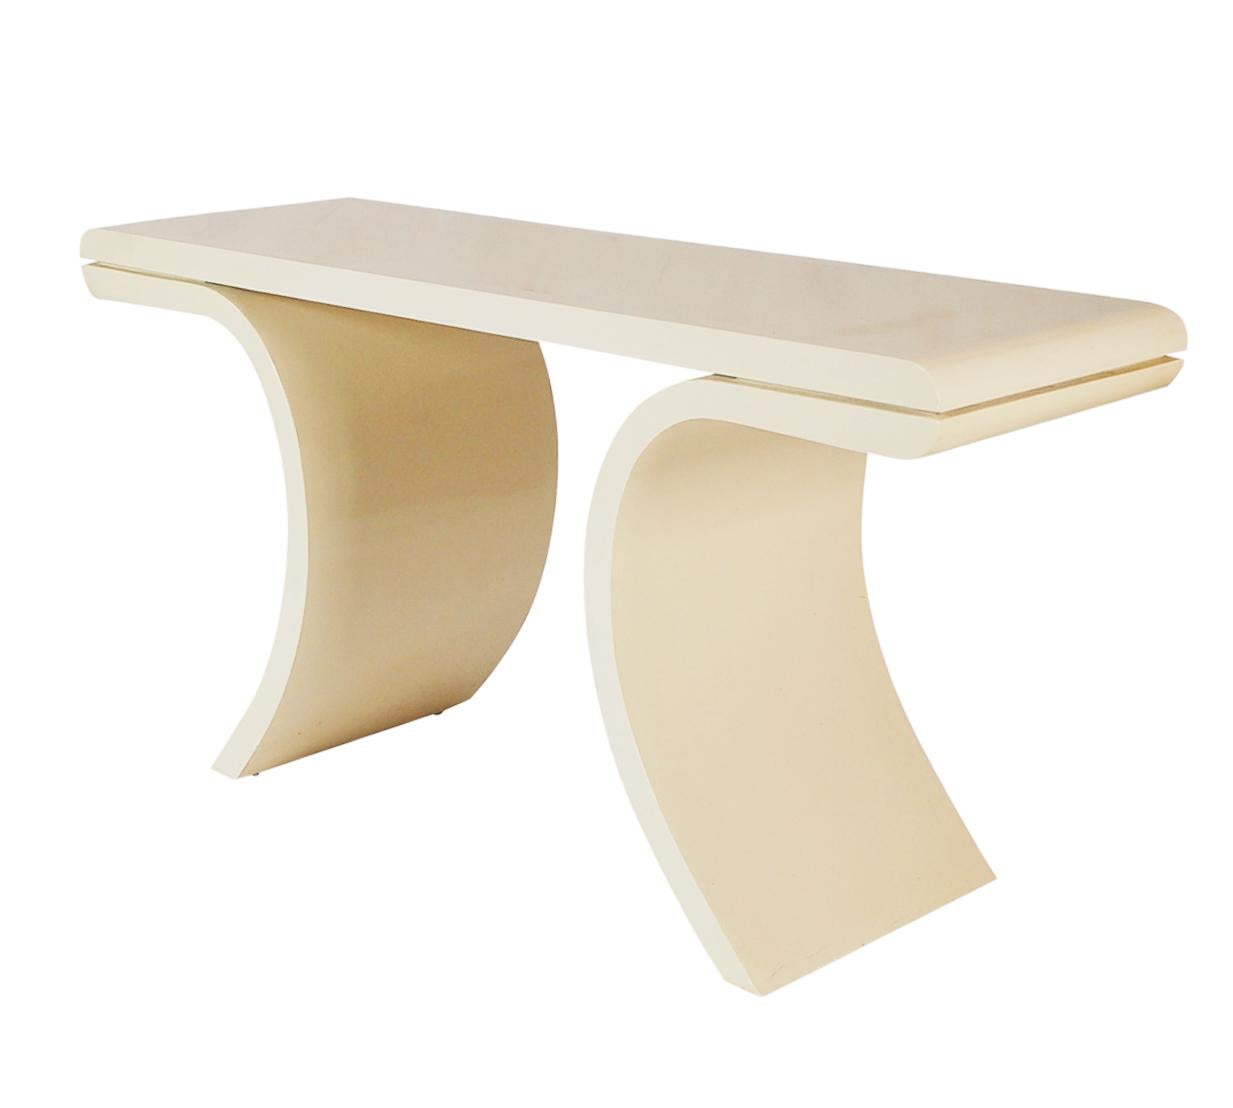 A curvy leg well made console from Italy, circa 1980s. It features heavy solid construction with gloss beige lacquer and brush stroke design top.